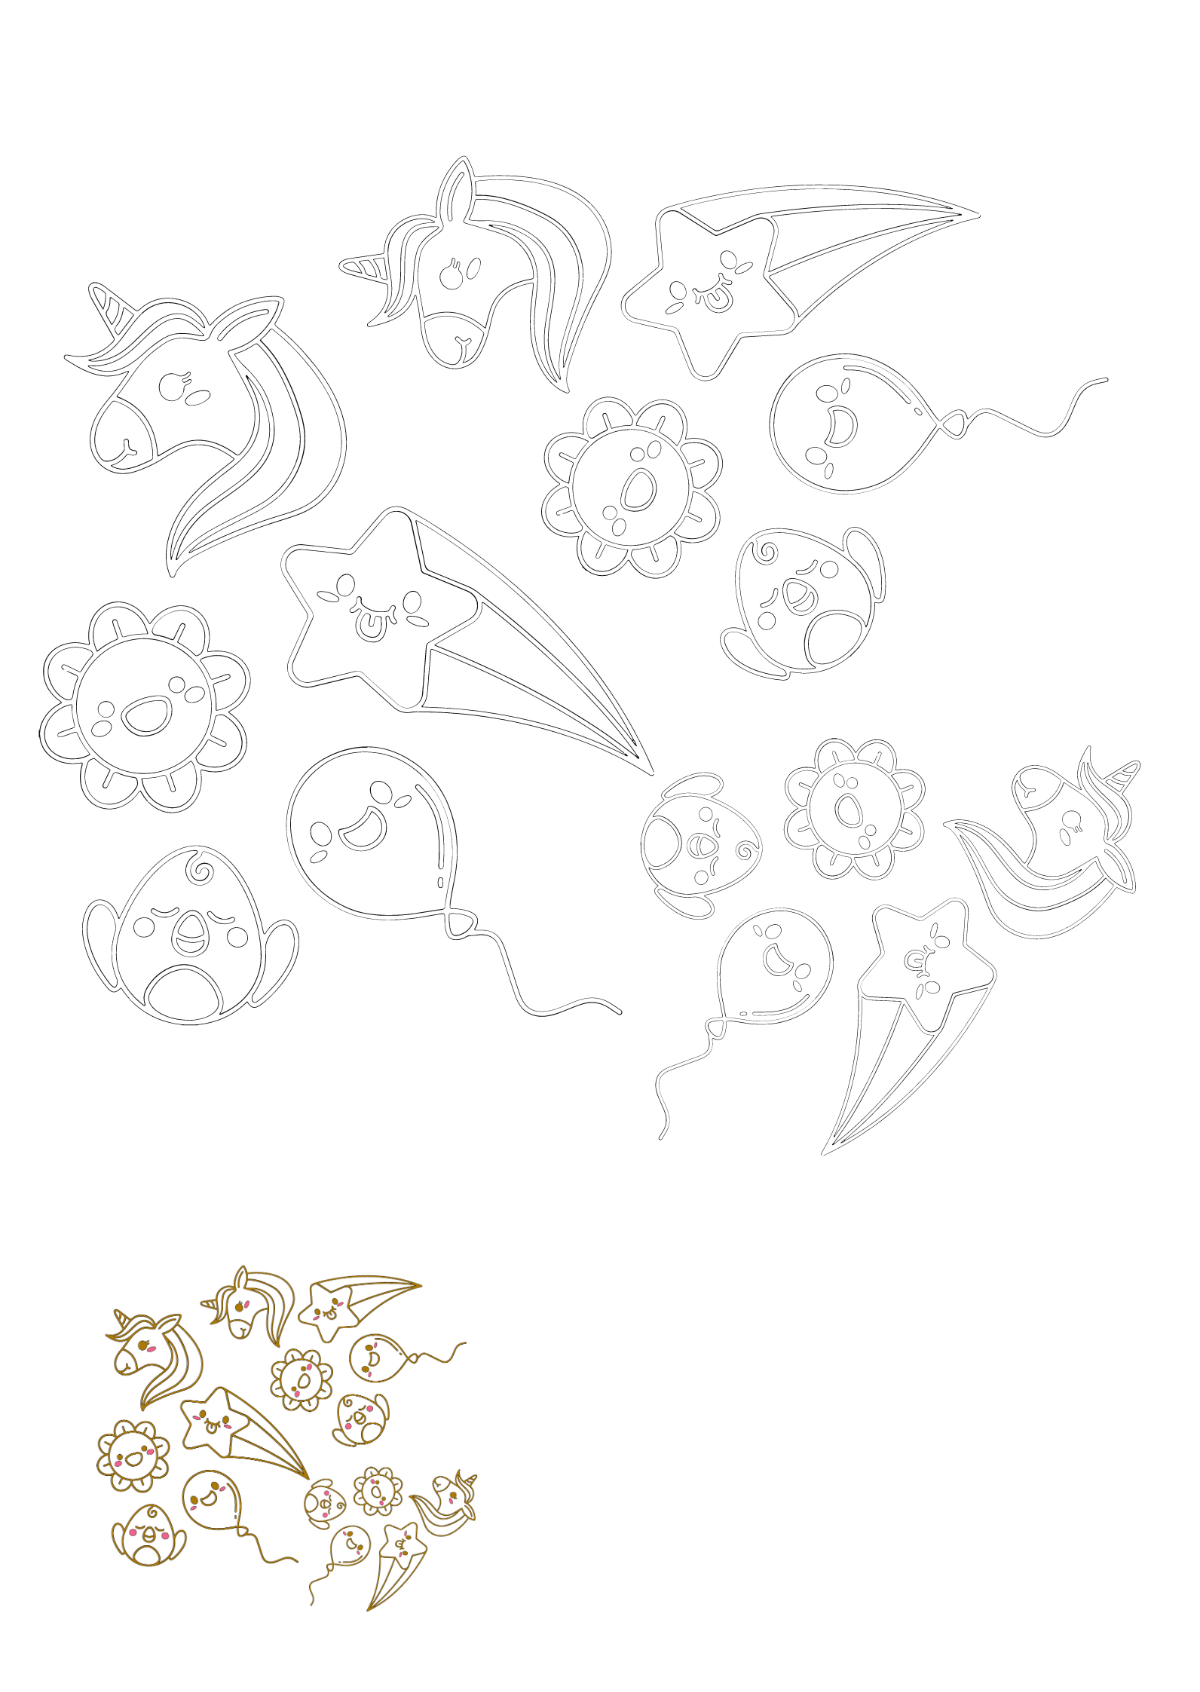 Free Cute Doodle Coloring Page Template